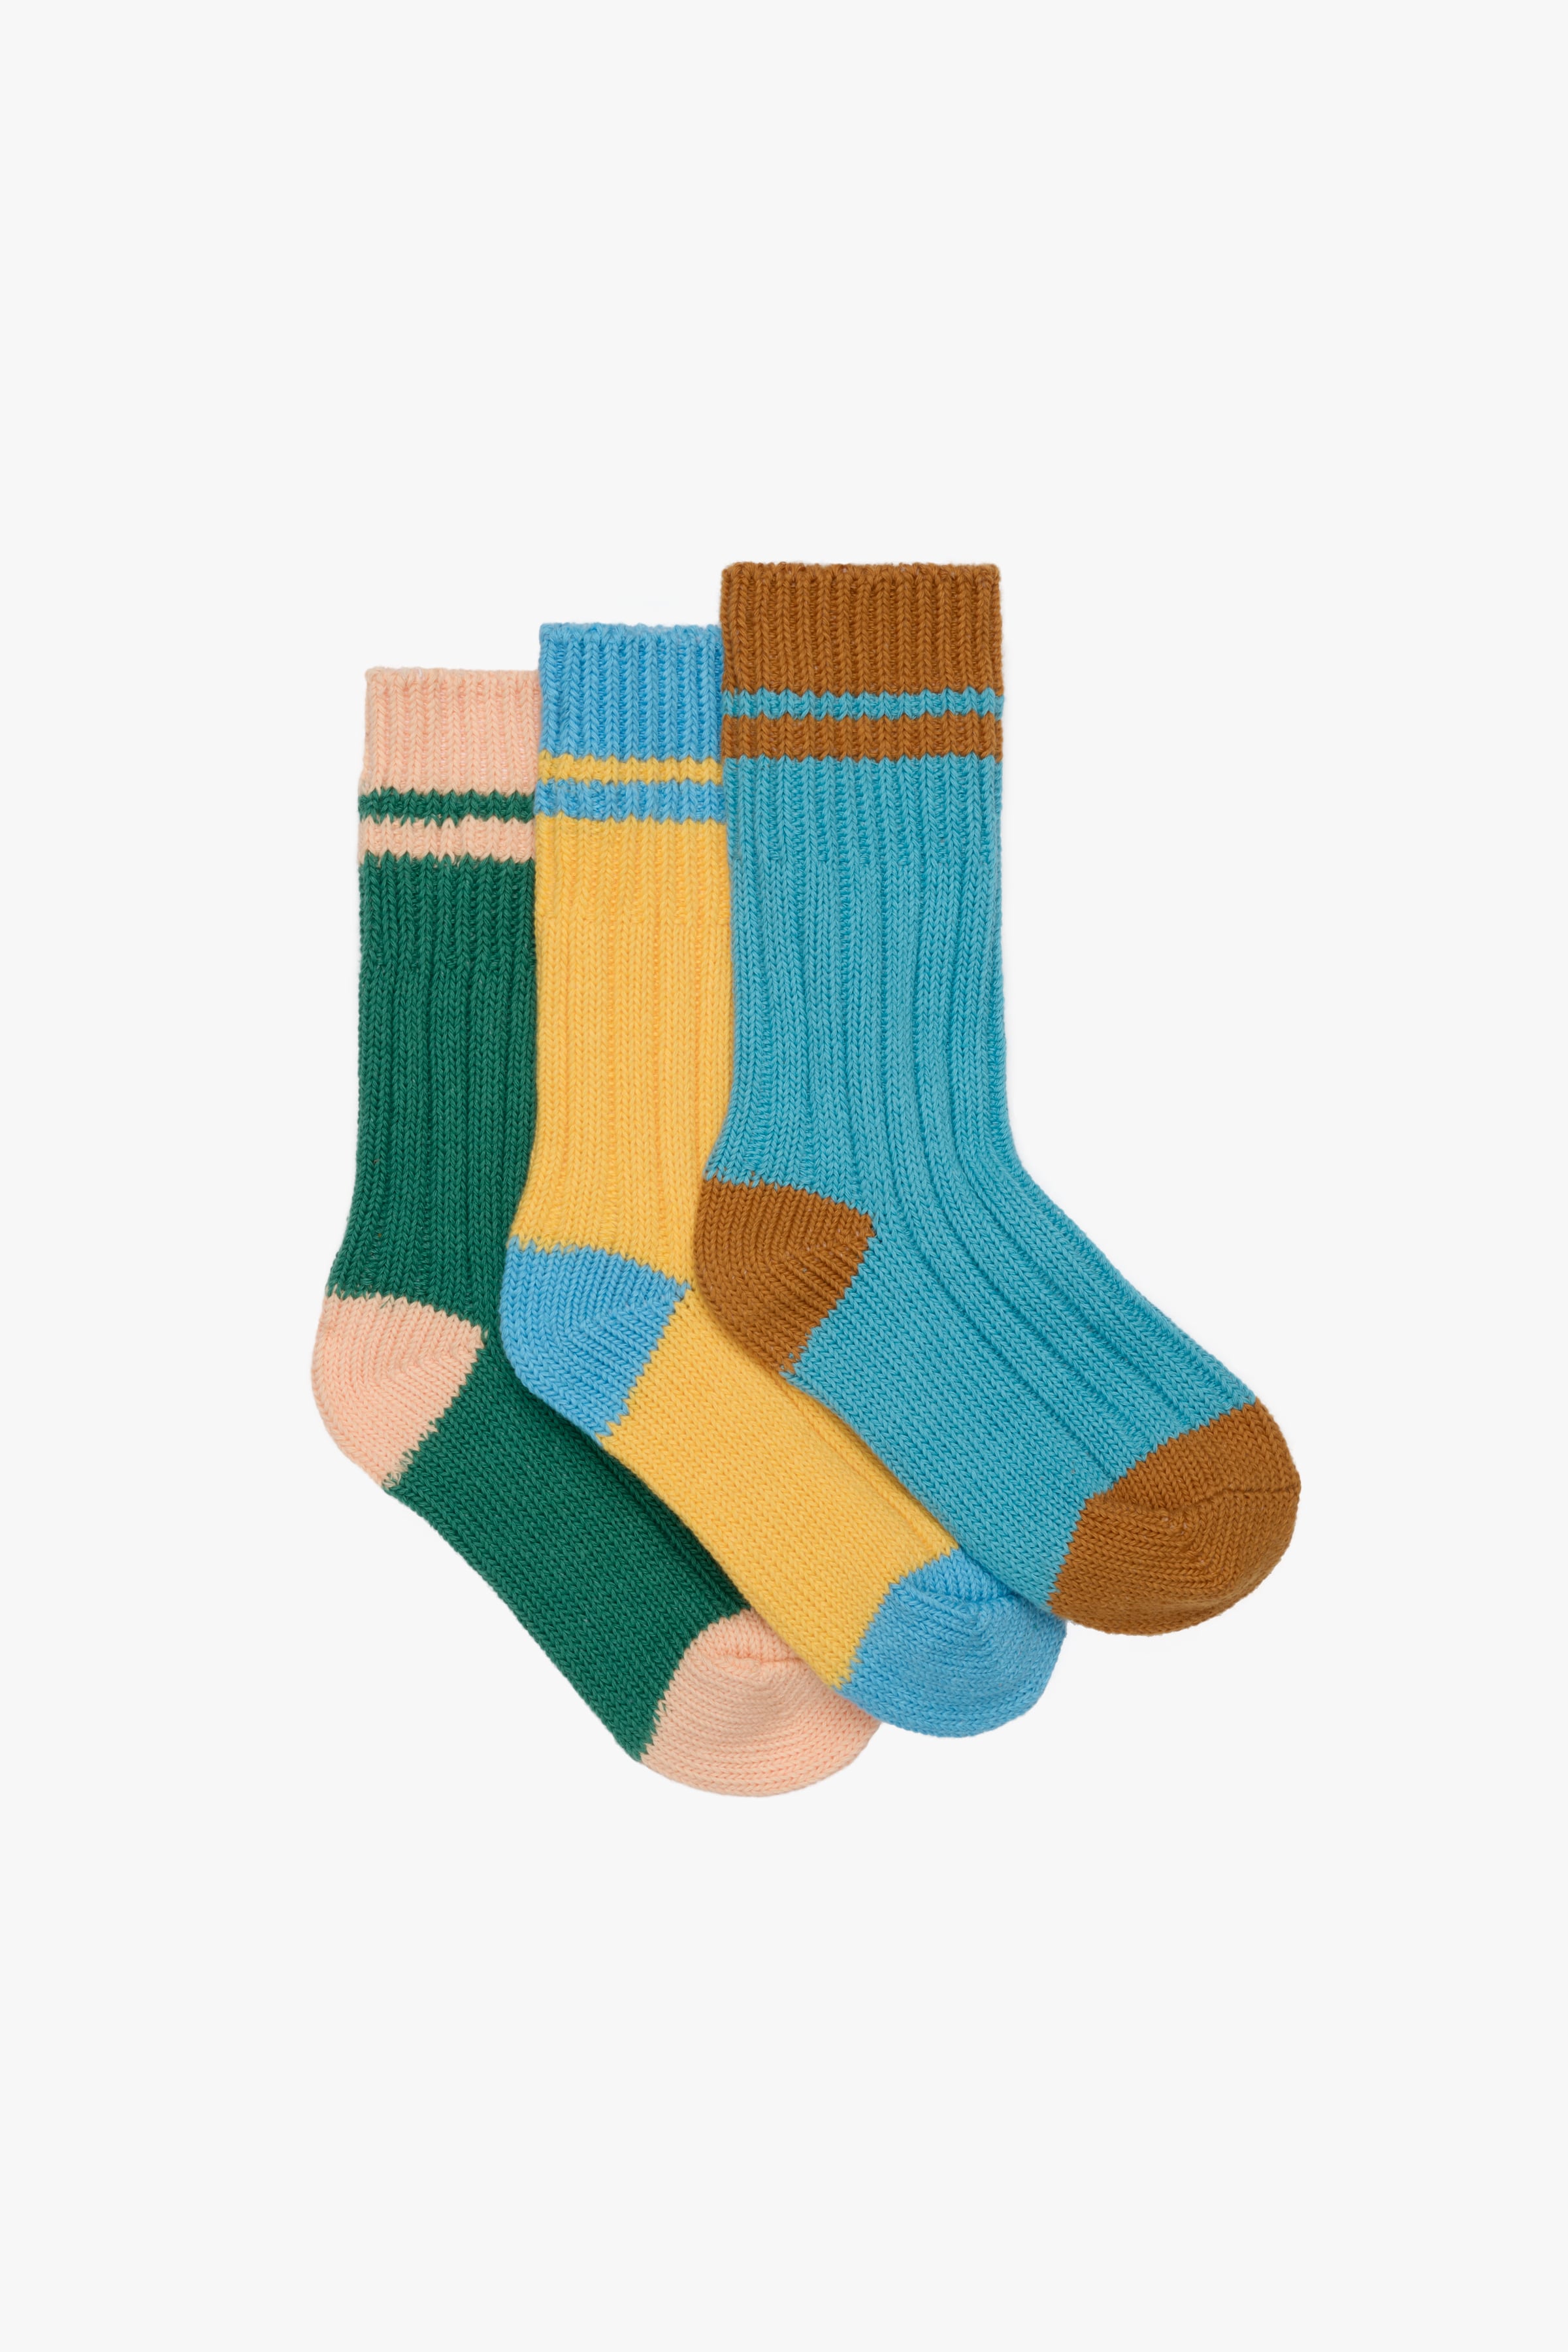 THREE PACK OF KNIT SOCKS LIMITED EDITION